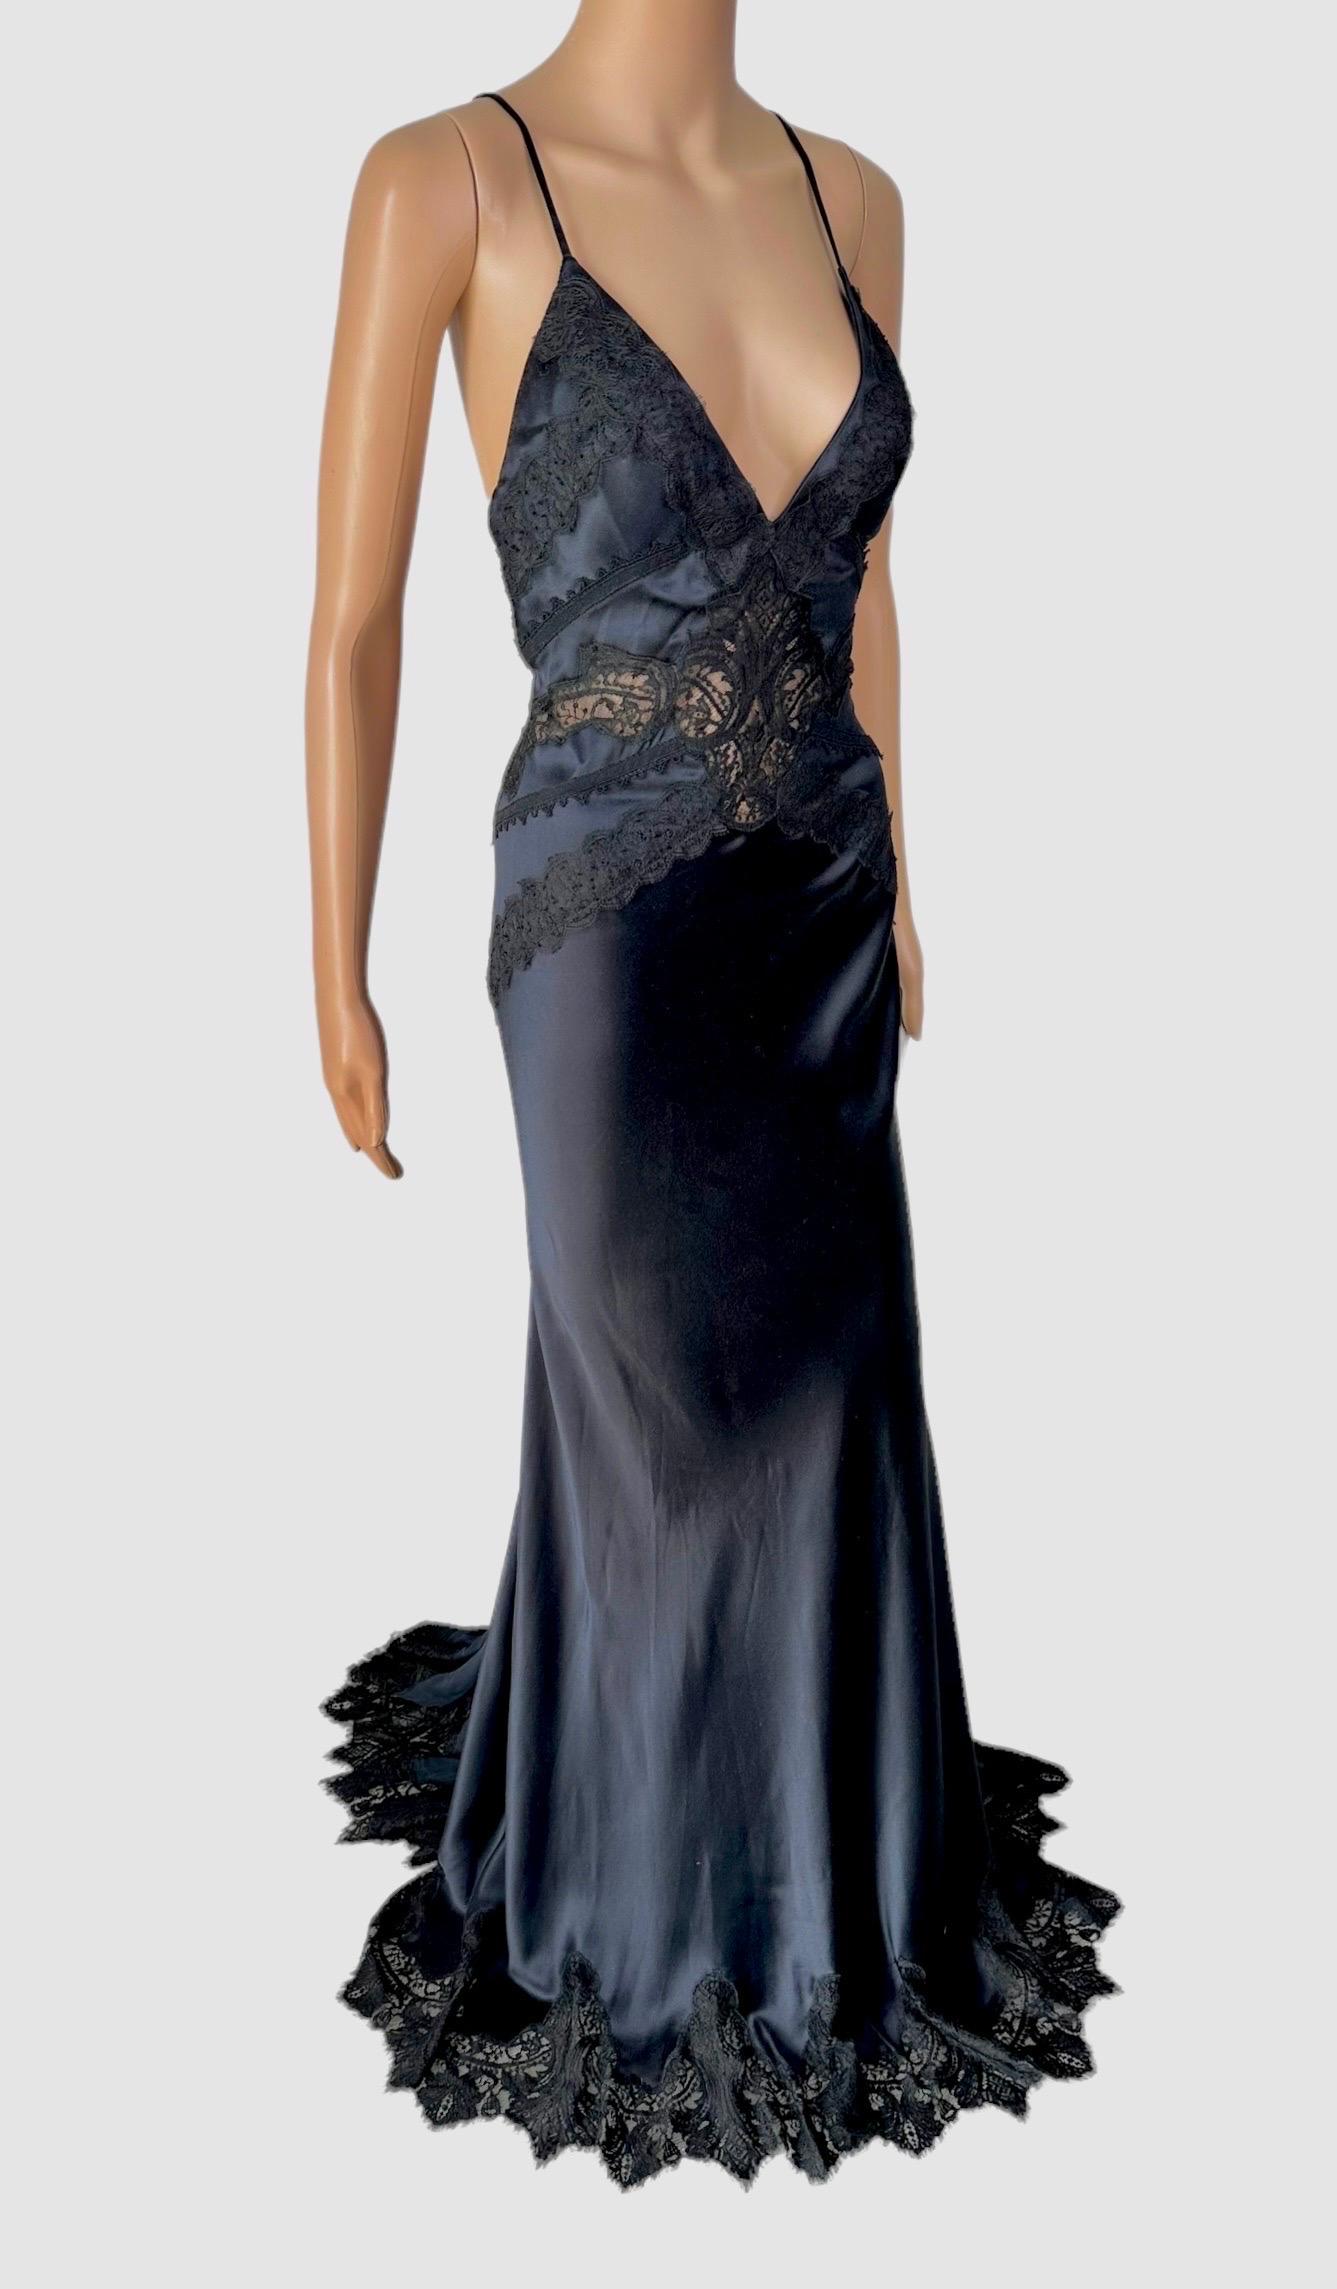 Versace c..2006 Plunging Neckline Sheer Lace Panels Backless Evening Dress Gown IT 42


